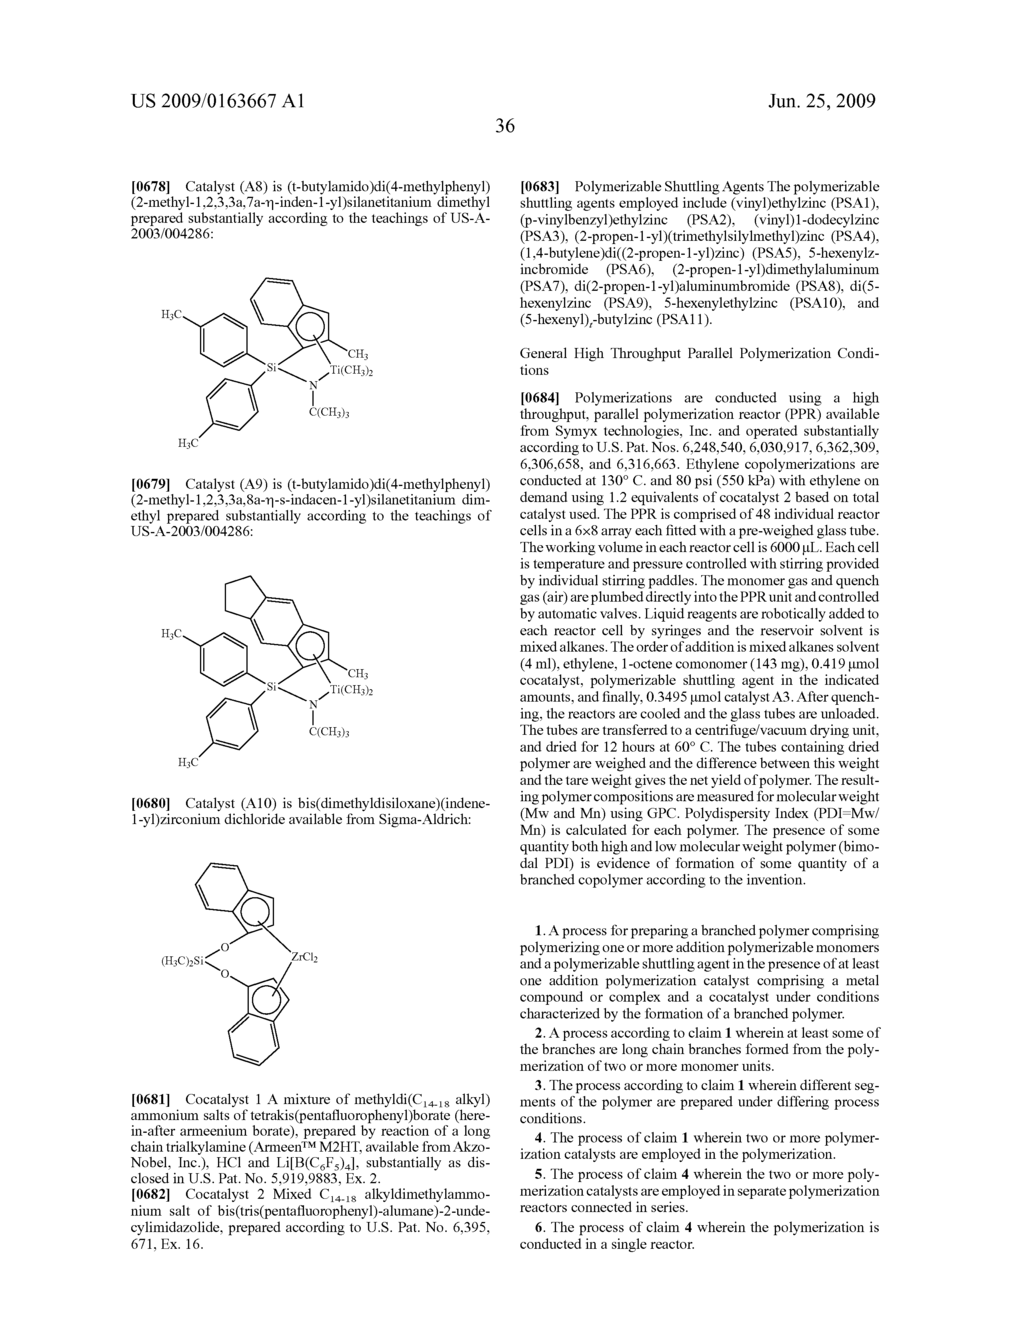 CATALYTIC OLEFIN BLOCK COPOLYMERS VIA POLYMERIZABLE SHUTTLING AGENT - diagram, schematic, and image 38